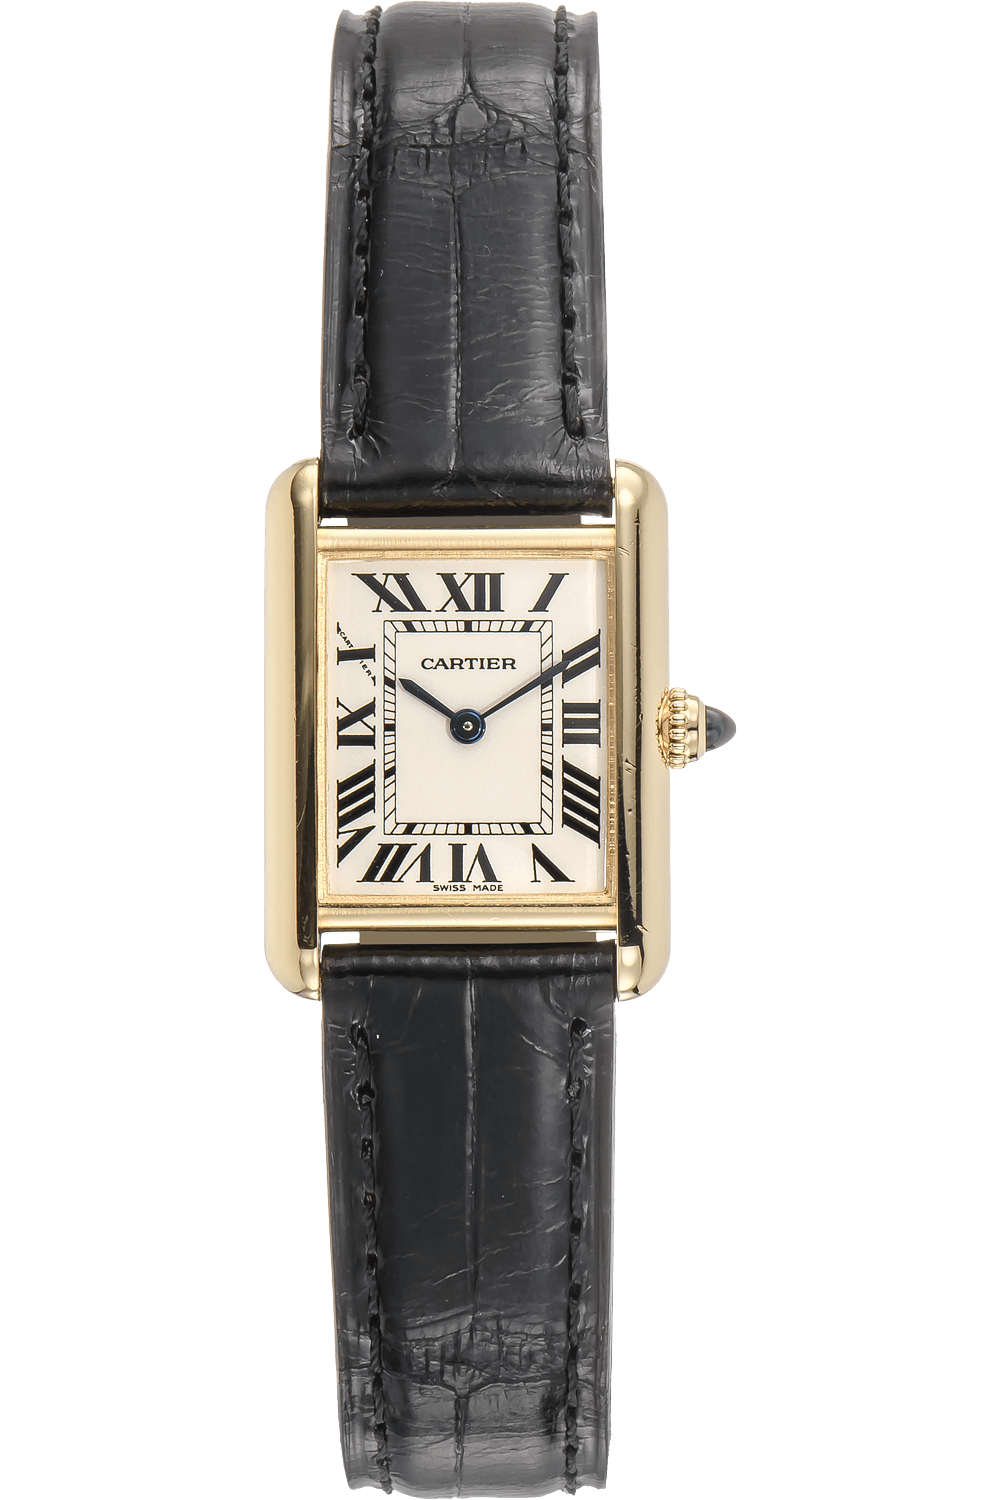 Lot - CARTIER TANK LOUIS 18KT YELLOW GOLD WOMAN'S WRISTWATCH Ref. W1529856.  Serial number 52841UX. Quartz movement. Silver-grained dial wi..